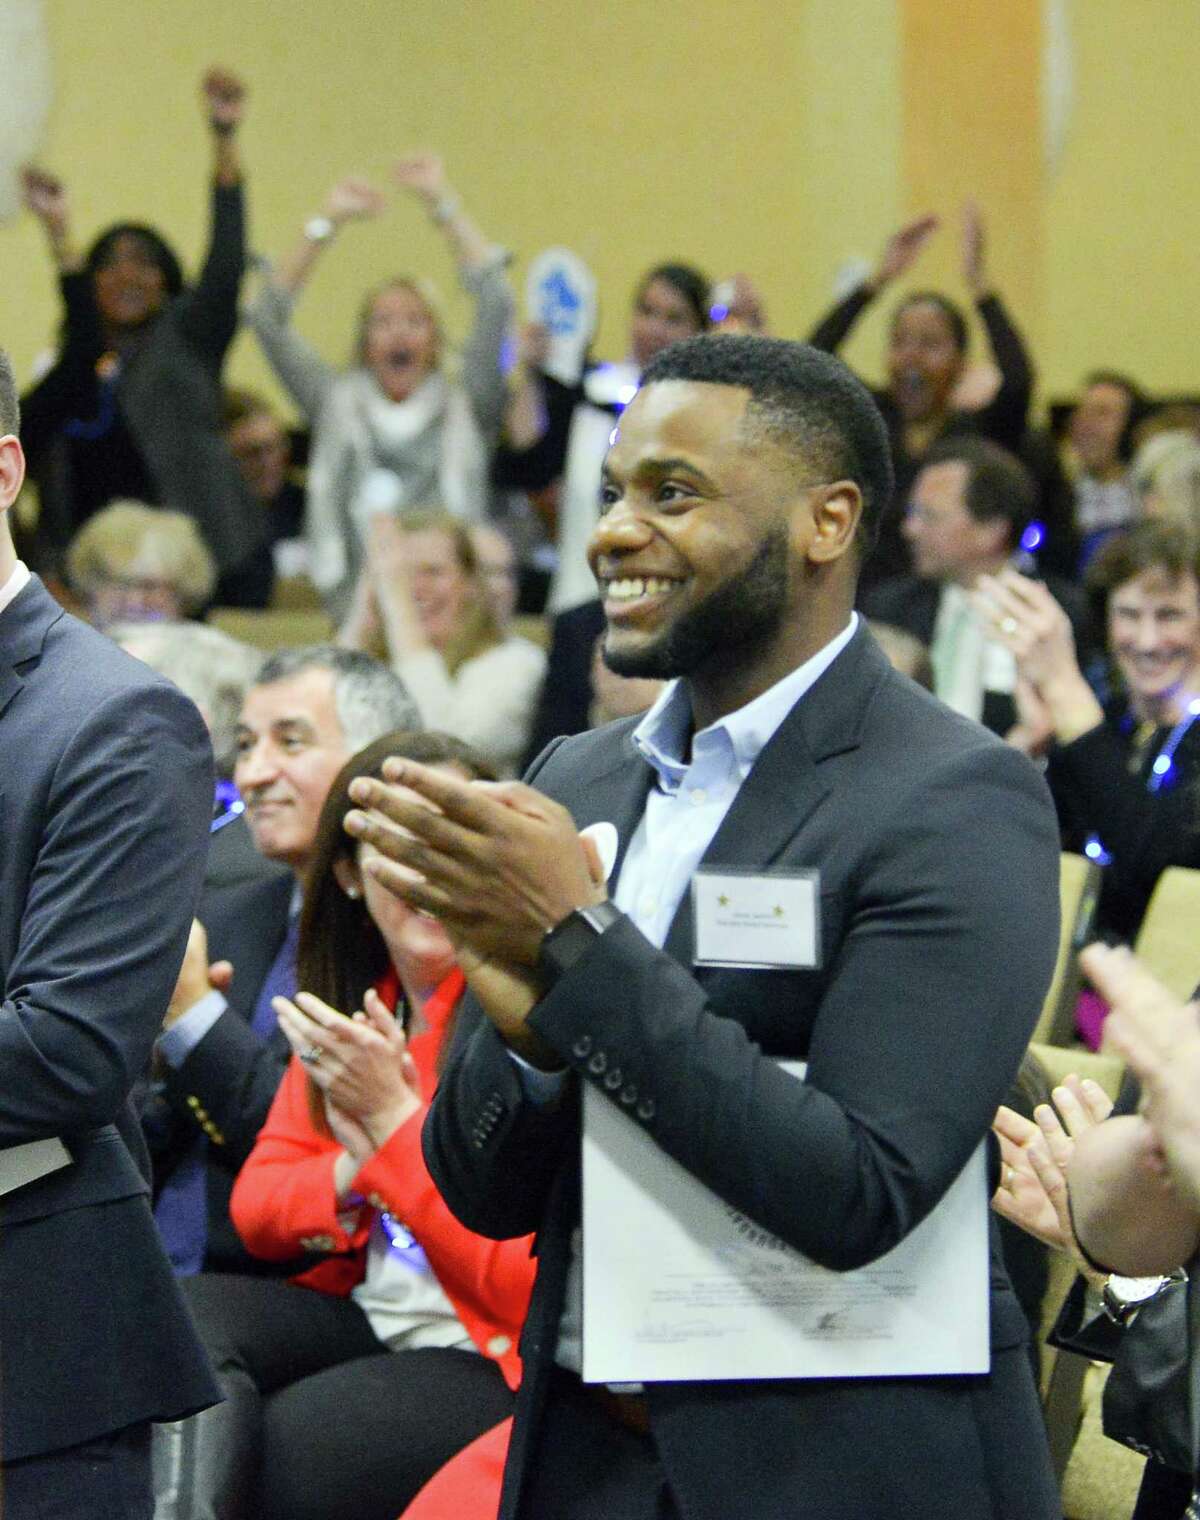 Family and friends celebrate as Josue Jasmin of Rogers International School is named as co-Educator Award winner, along with Claude Morest of AITE during the Stamford Public Education Foundation 2017 Excellence in Education Awards ceremony at the Sheraton Stamford Hotel in Stamford, Conn. on March 23, 2017.